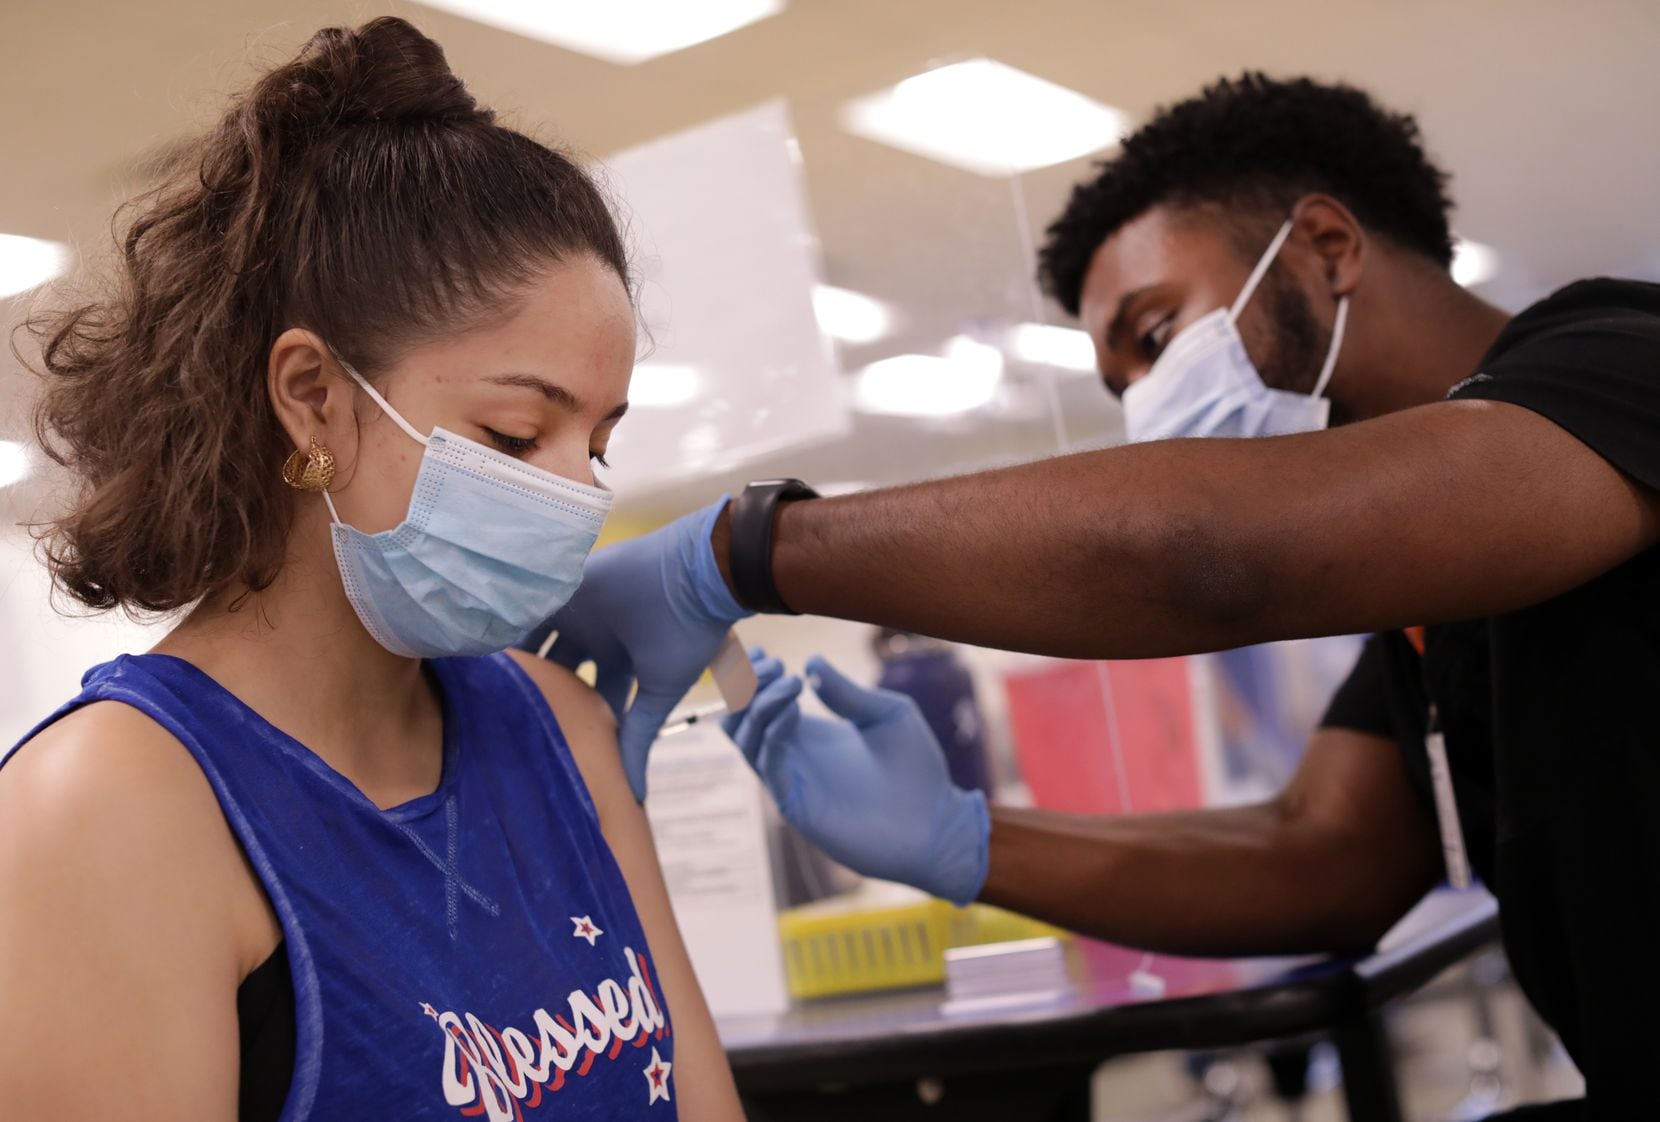 16-year-old Emilia Carreno received a COVID-19 vaccination shot from Kendall Payne during a pop-up clinic put on by Dallas ISD and Parkland Memorial Hospital at Samuell High School on June 28. Health officials say that people who are not vaccinated for COVID-19 are at particular risk of contracting one of the disease's emerging variants.